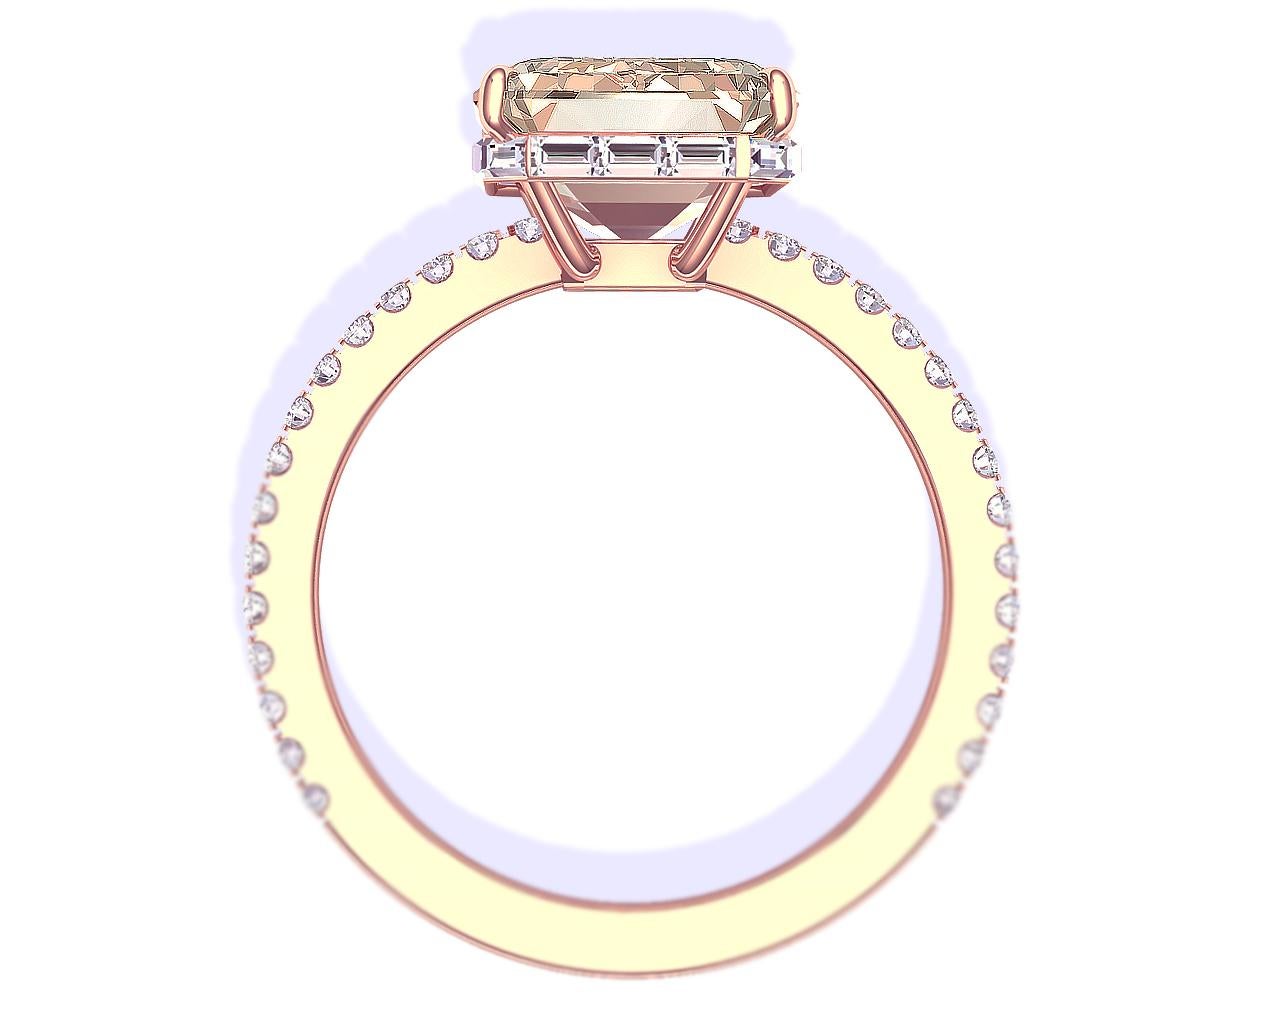 5 Carat Light Brown Emerald Cut Engagement Ring In Excellent Condition For Sale In Aliso Viejo, CA